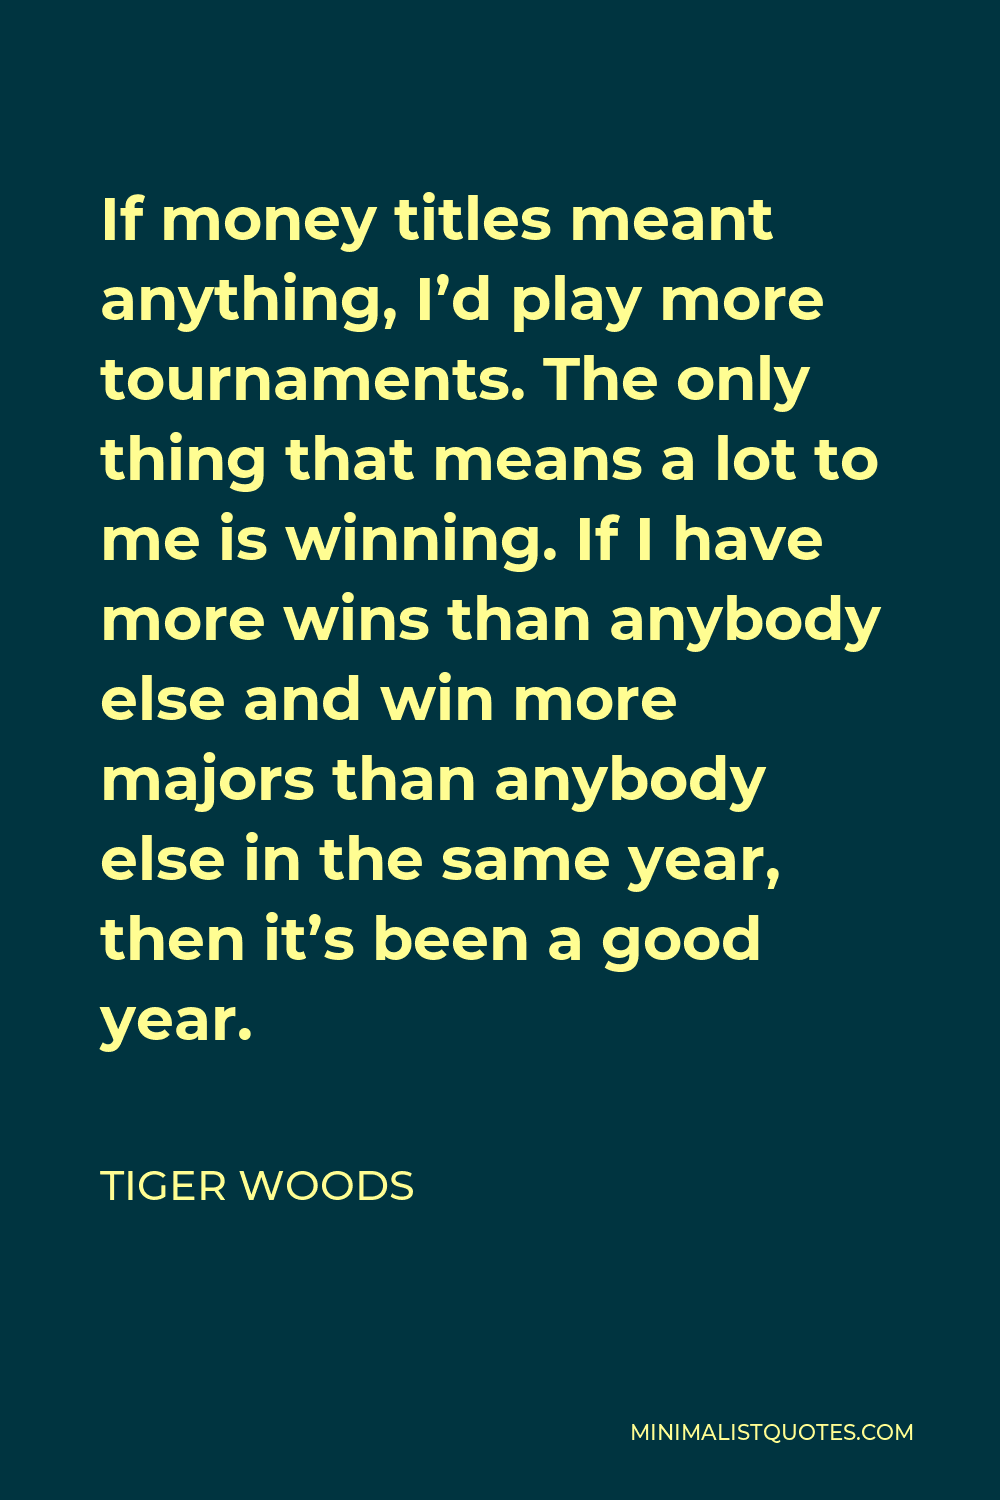 Tiger Woods Quote - If money titles meant anything, I’d play more tournaments. The only thing that means a lot to me is winning. If I have more wins than anybody else and win more majors than anybody else in the same year, then it’s been a good year.